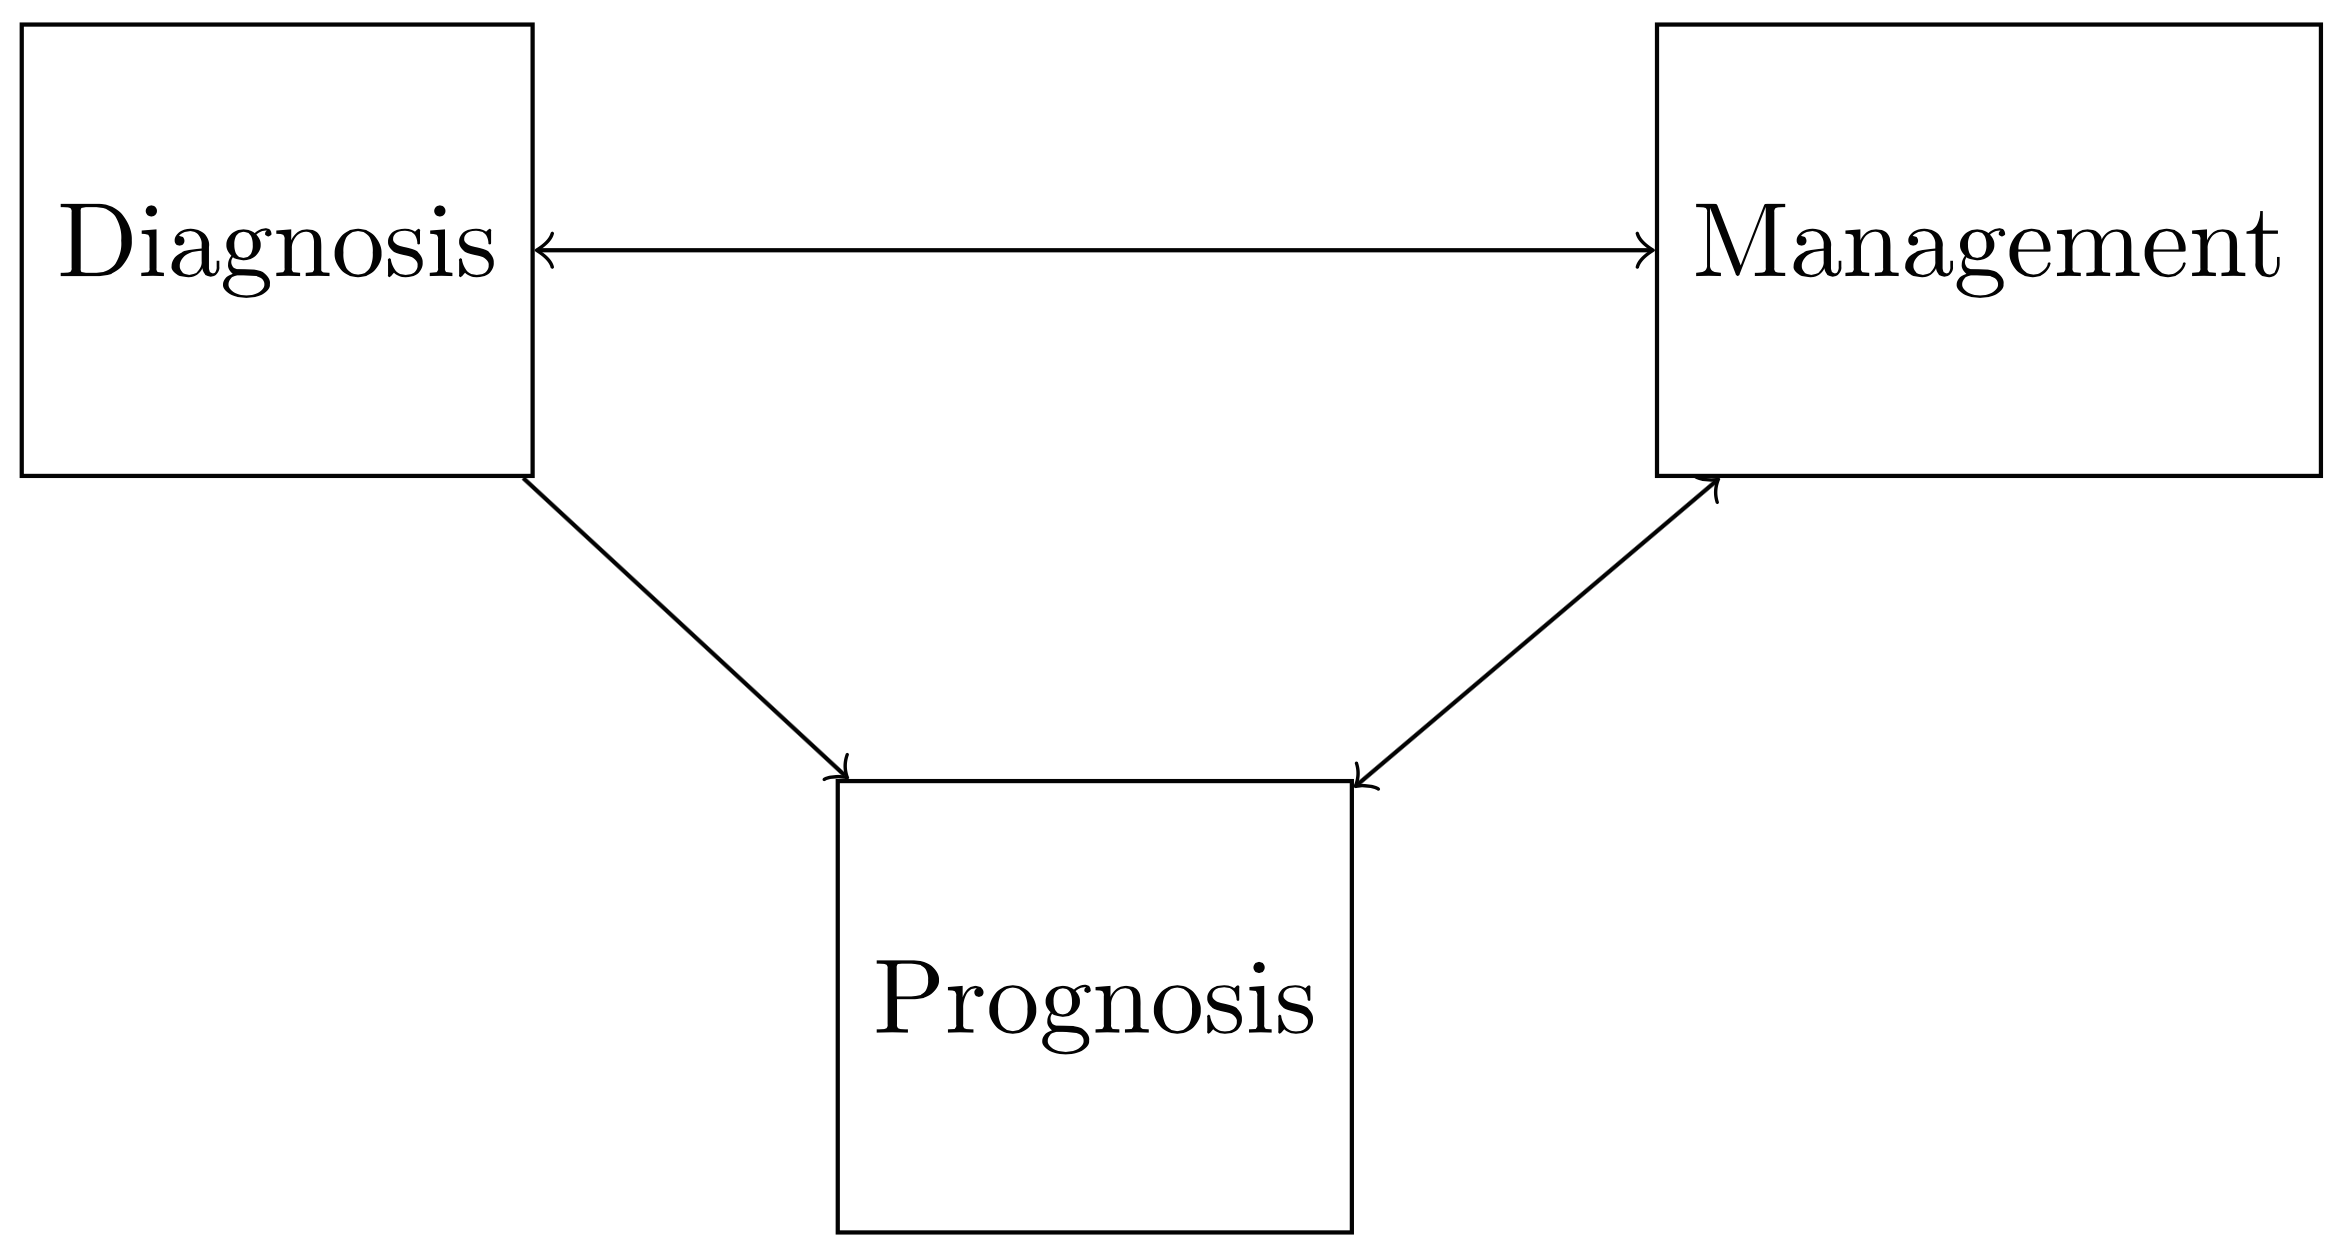 The relationship between diagnosis, prognosis, and management.